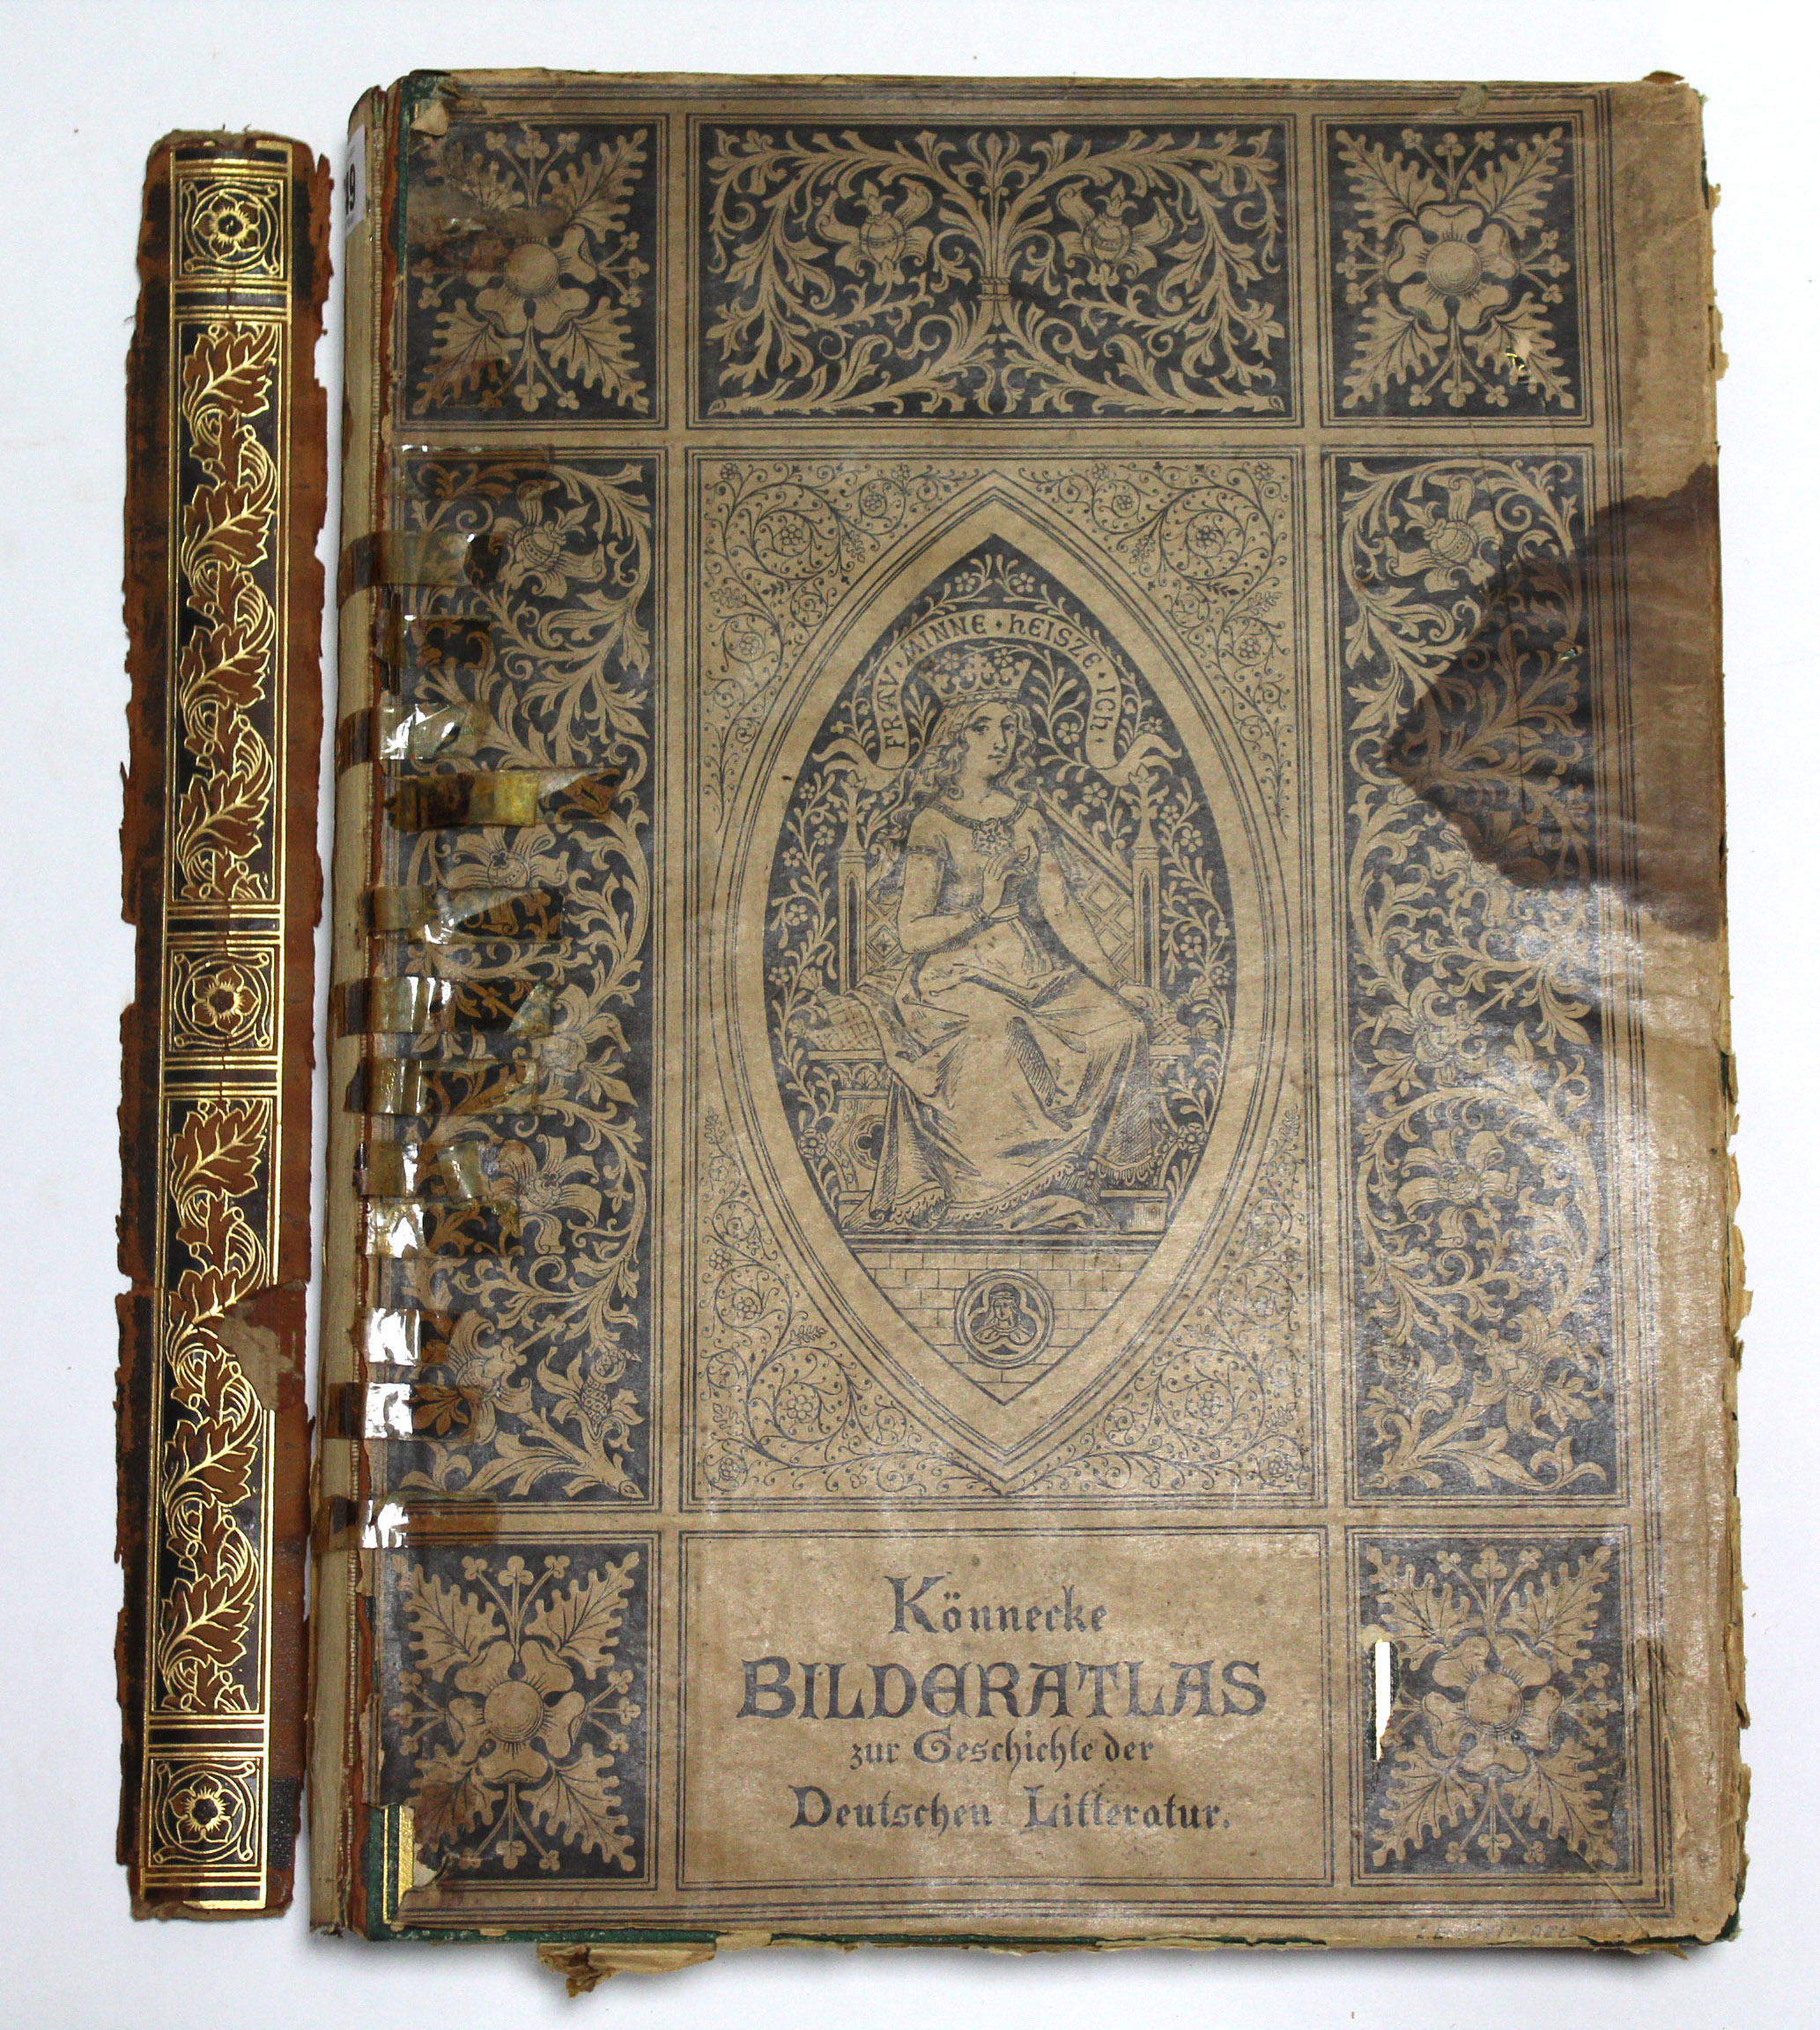 A late 19th century leather-bound German atlas, published in 1895.